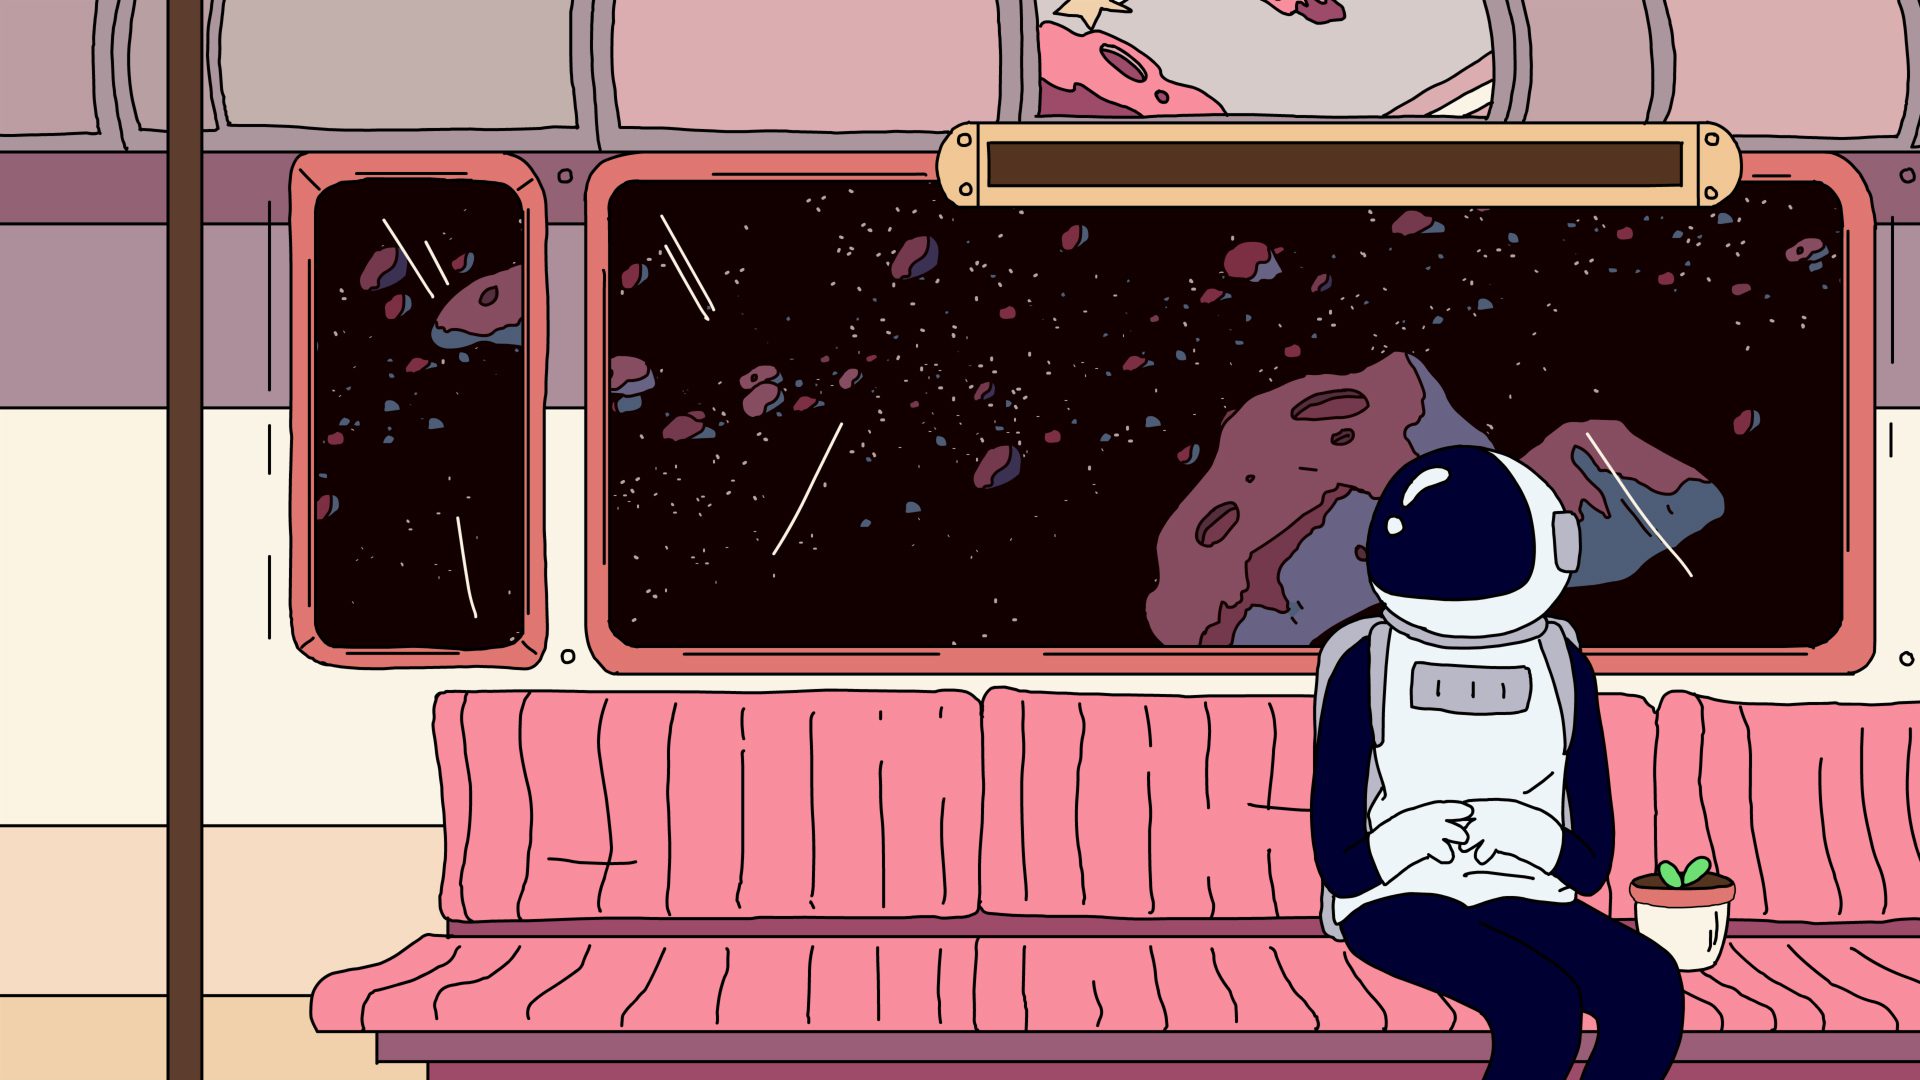 Q&A with Janice Chun on Short Animation, "Crushed In Space"